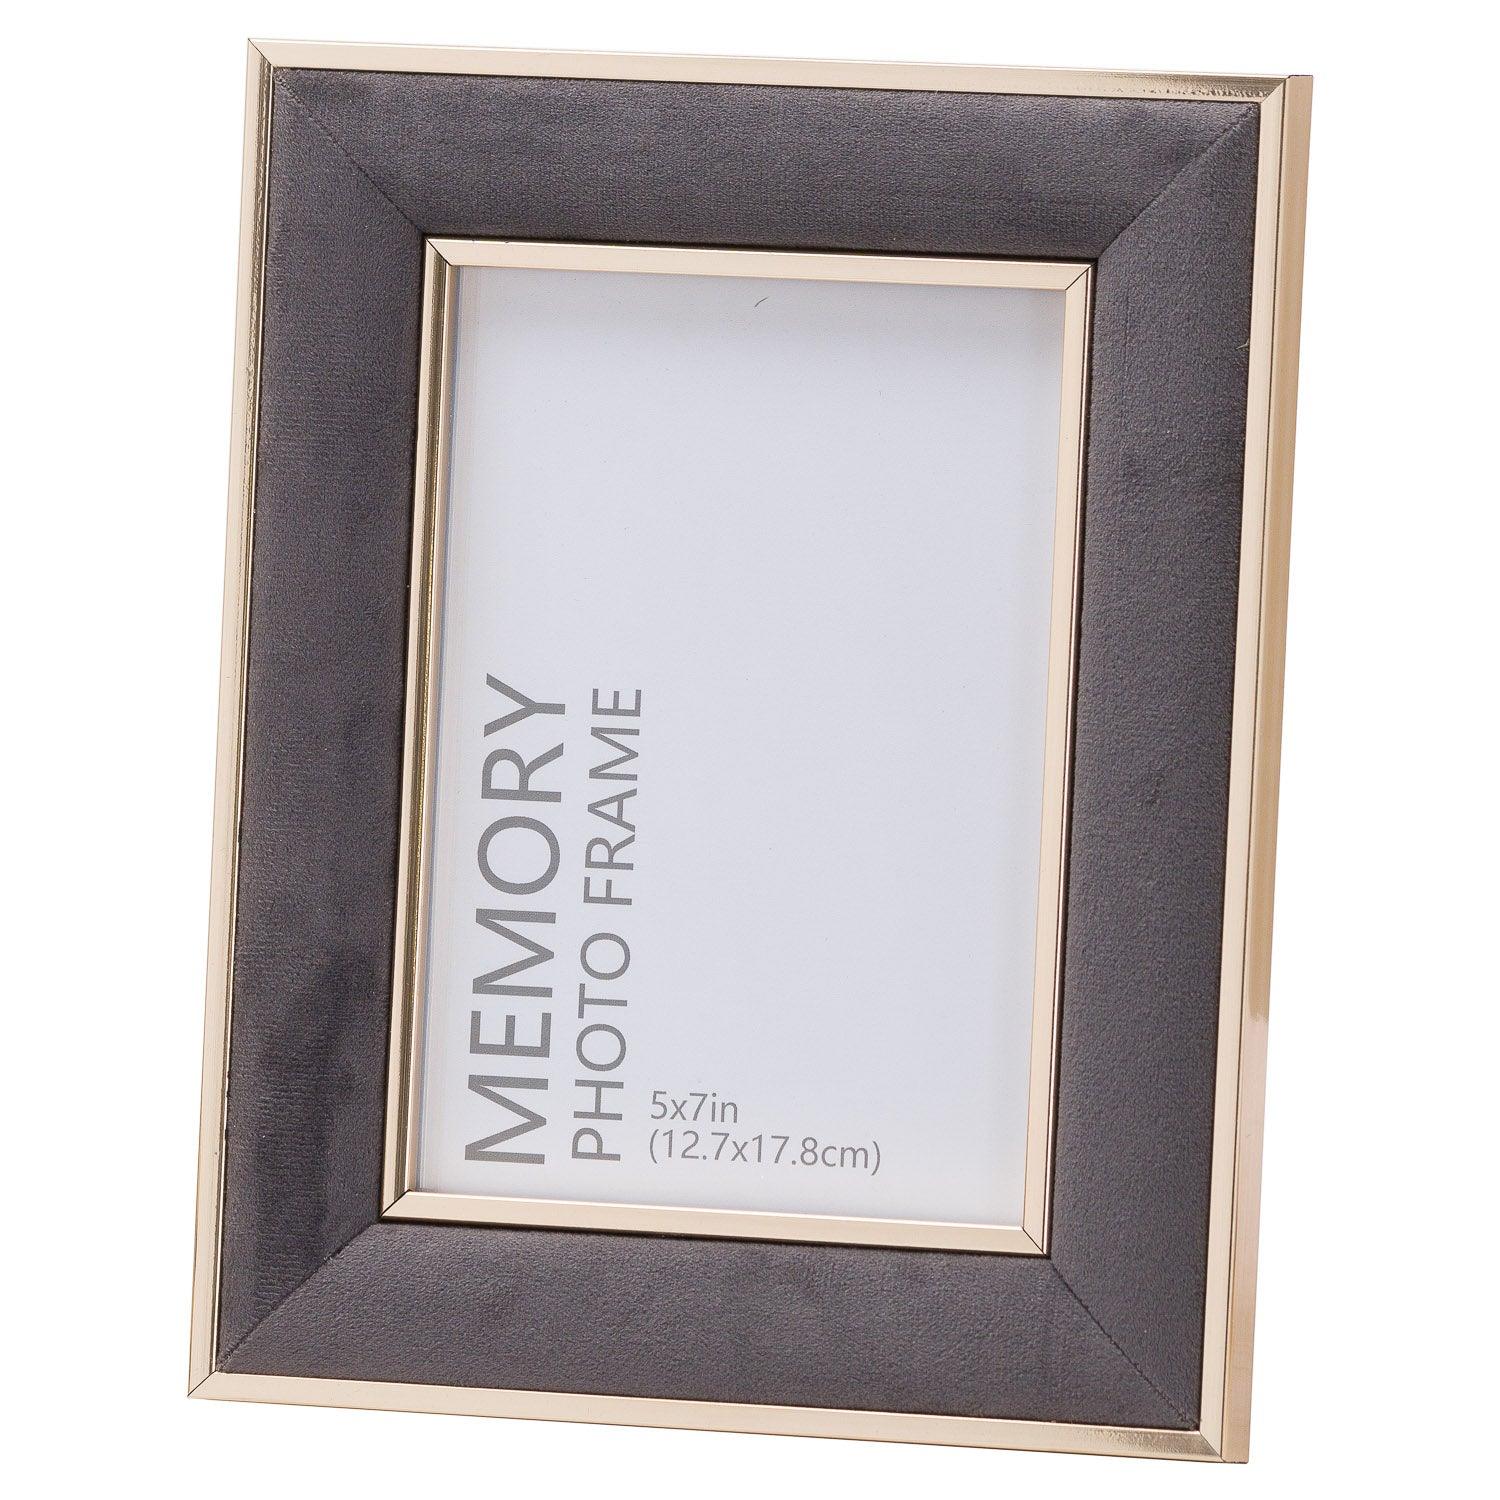 View Grey Velvet With Gold 5X7 Frame information